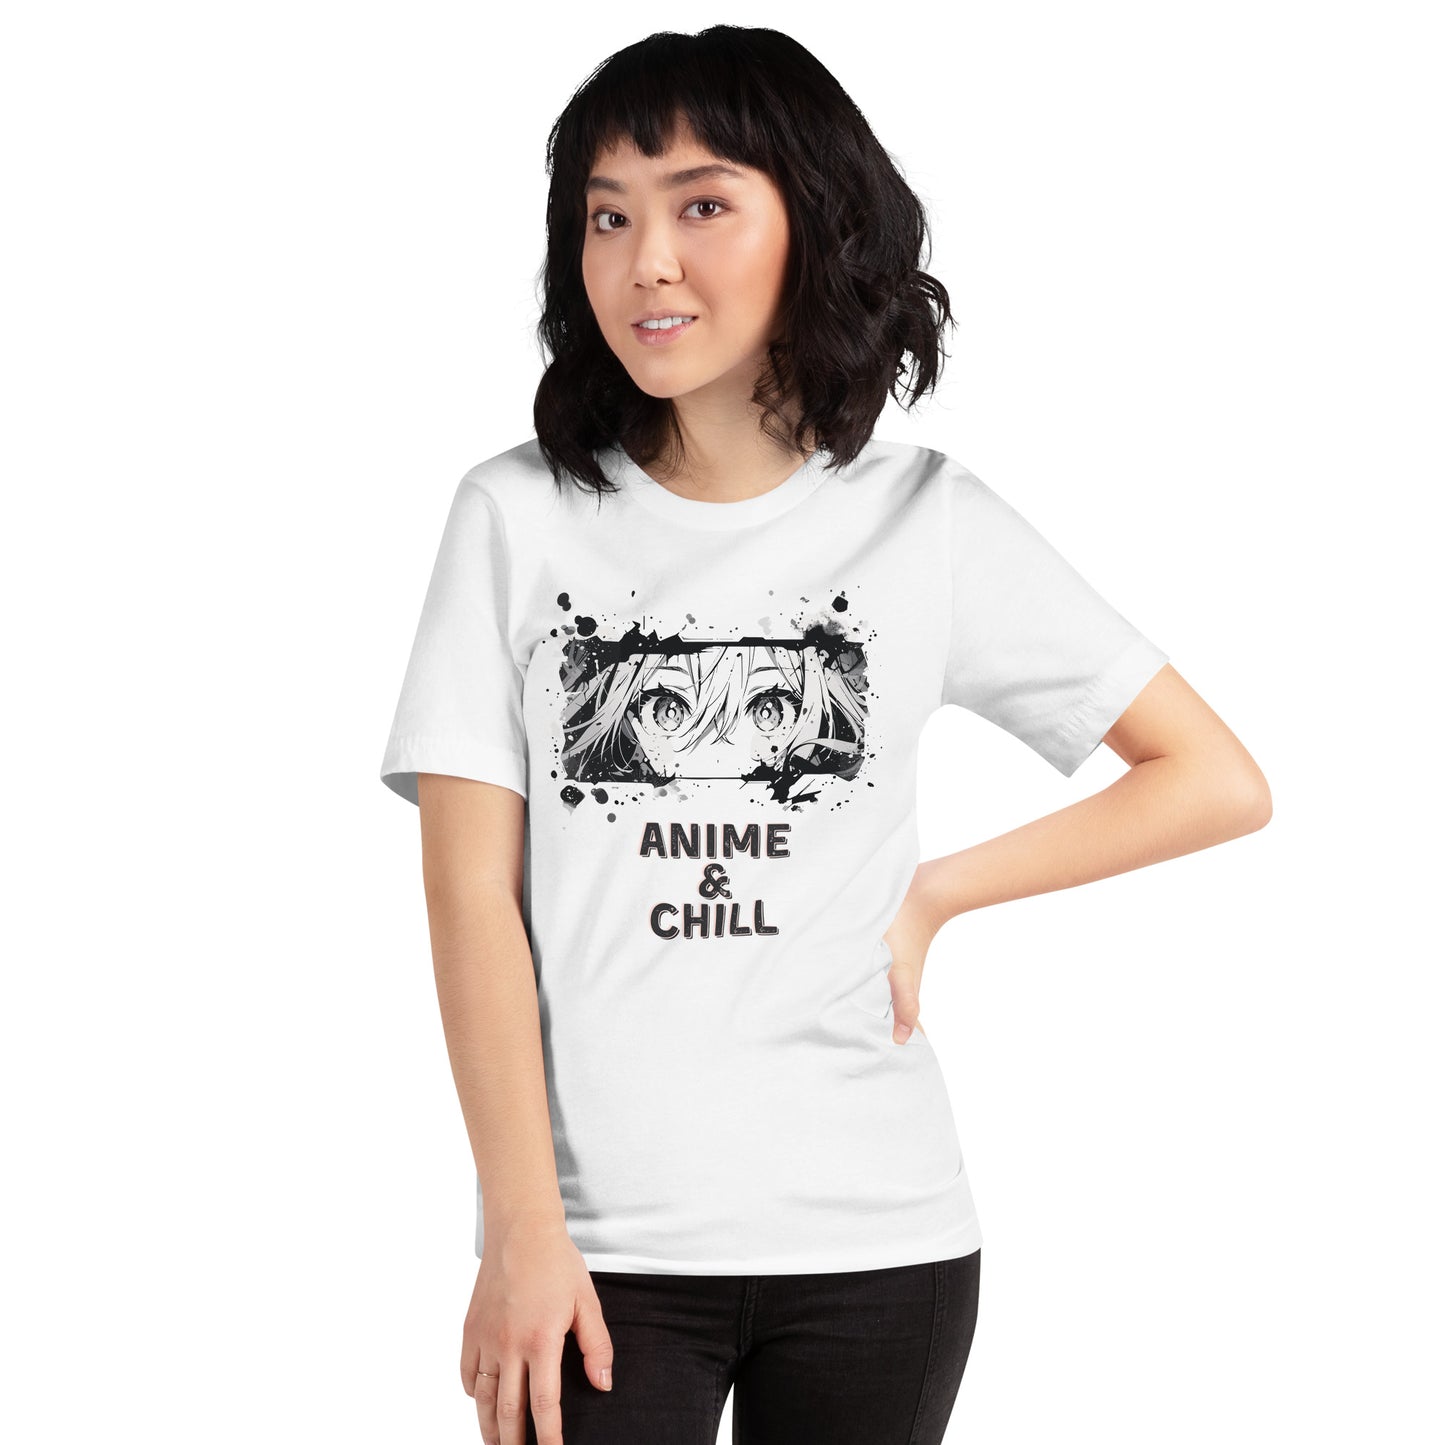 Anime & Chill: Cozy Tee for True Anime Fans | Printed Unisex t-shirt